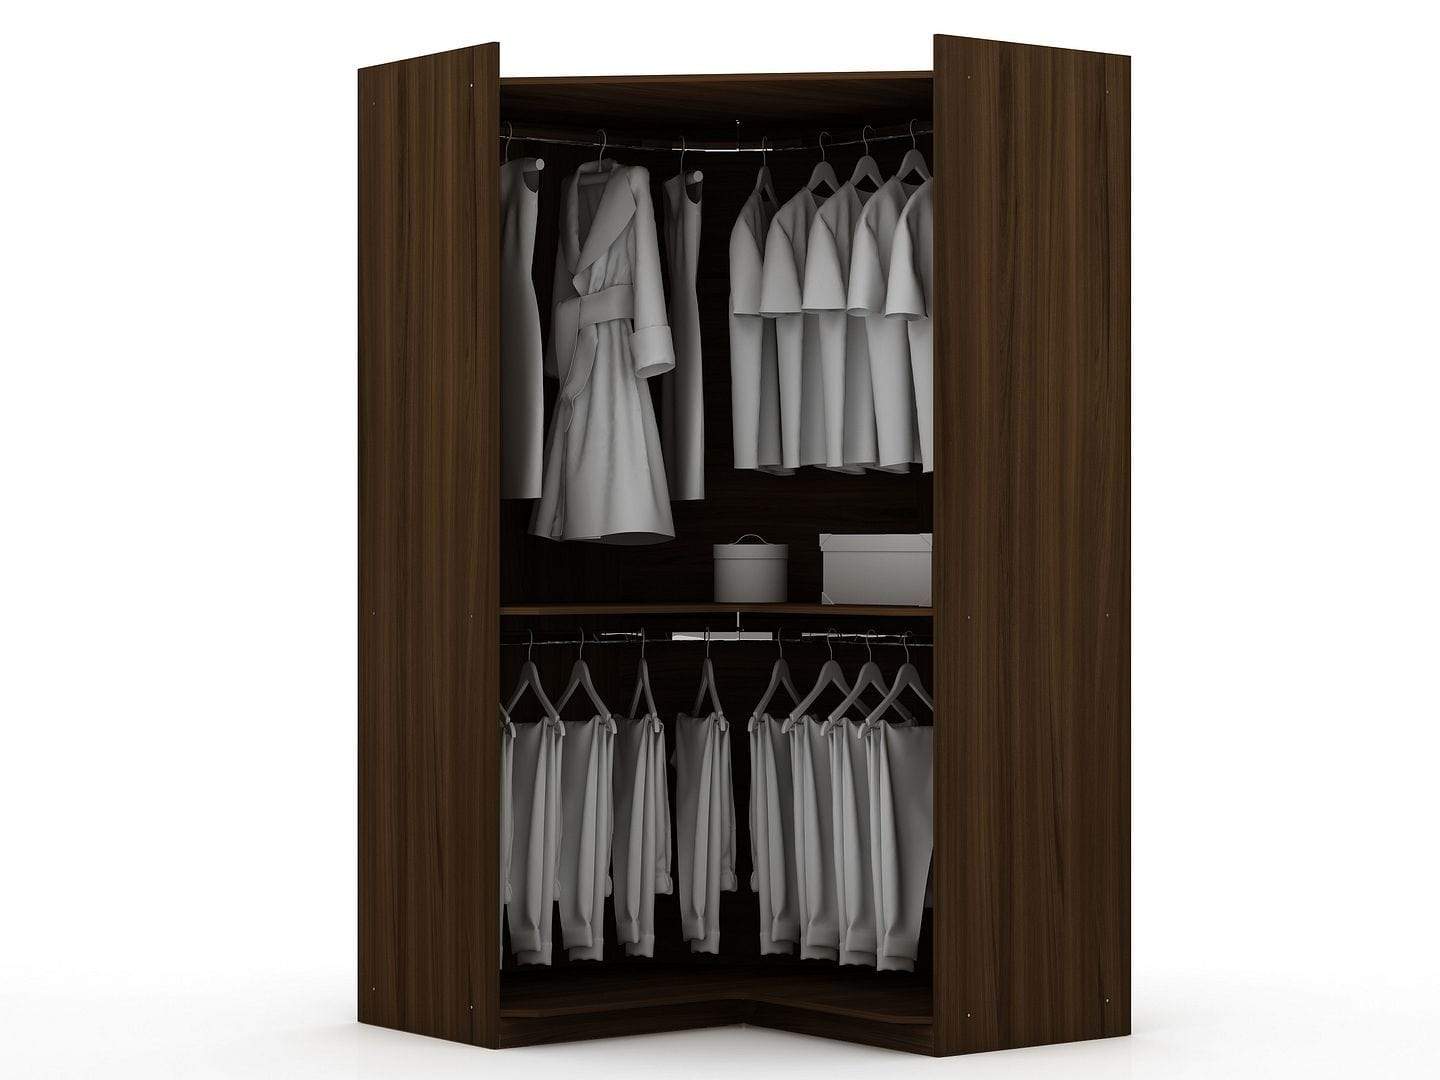 Mulberry 2.0 Modern Corner Wardrobe Closet with 2 Hanging Rods in Brown ...